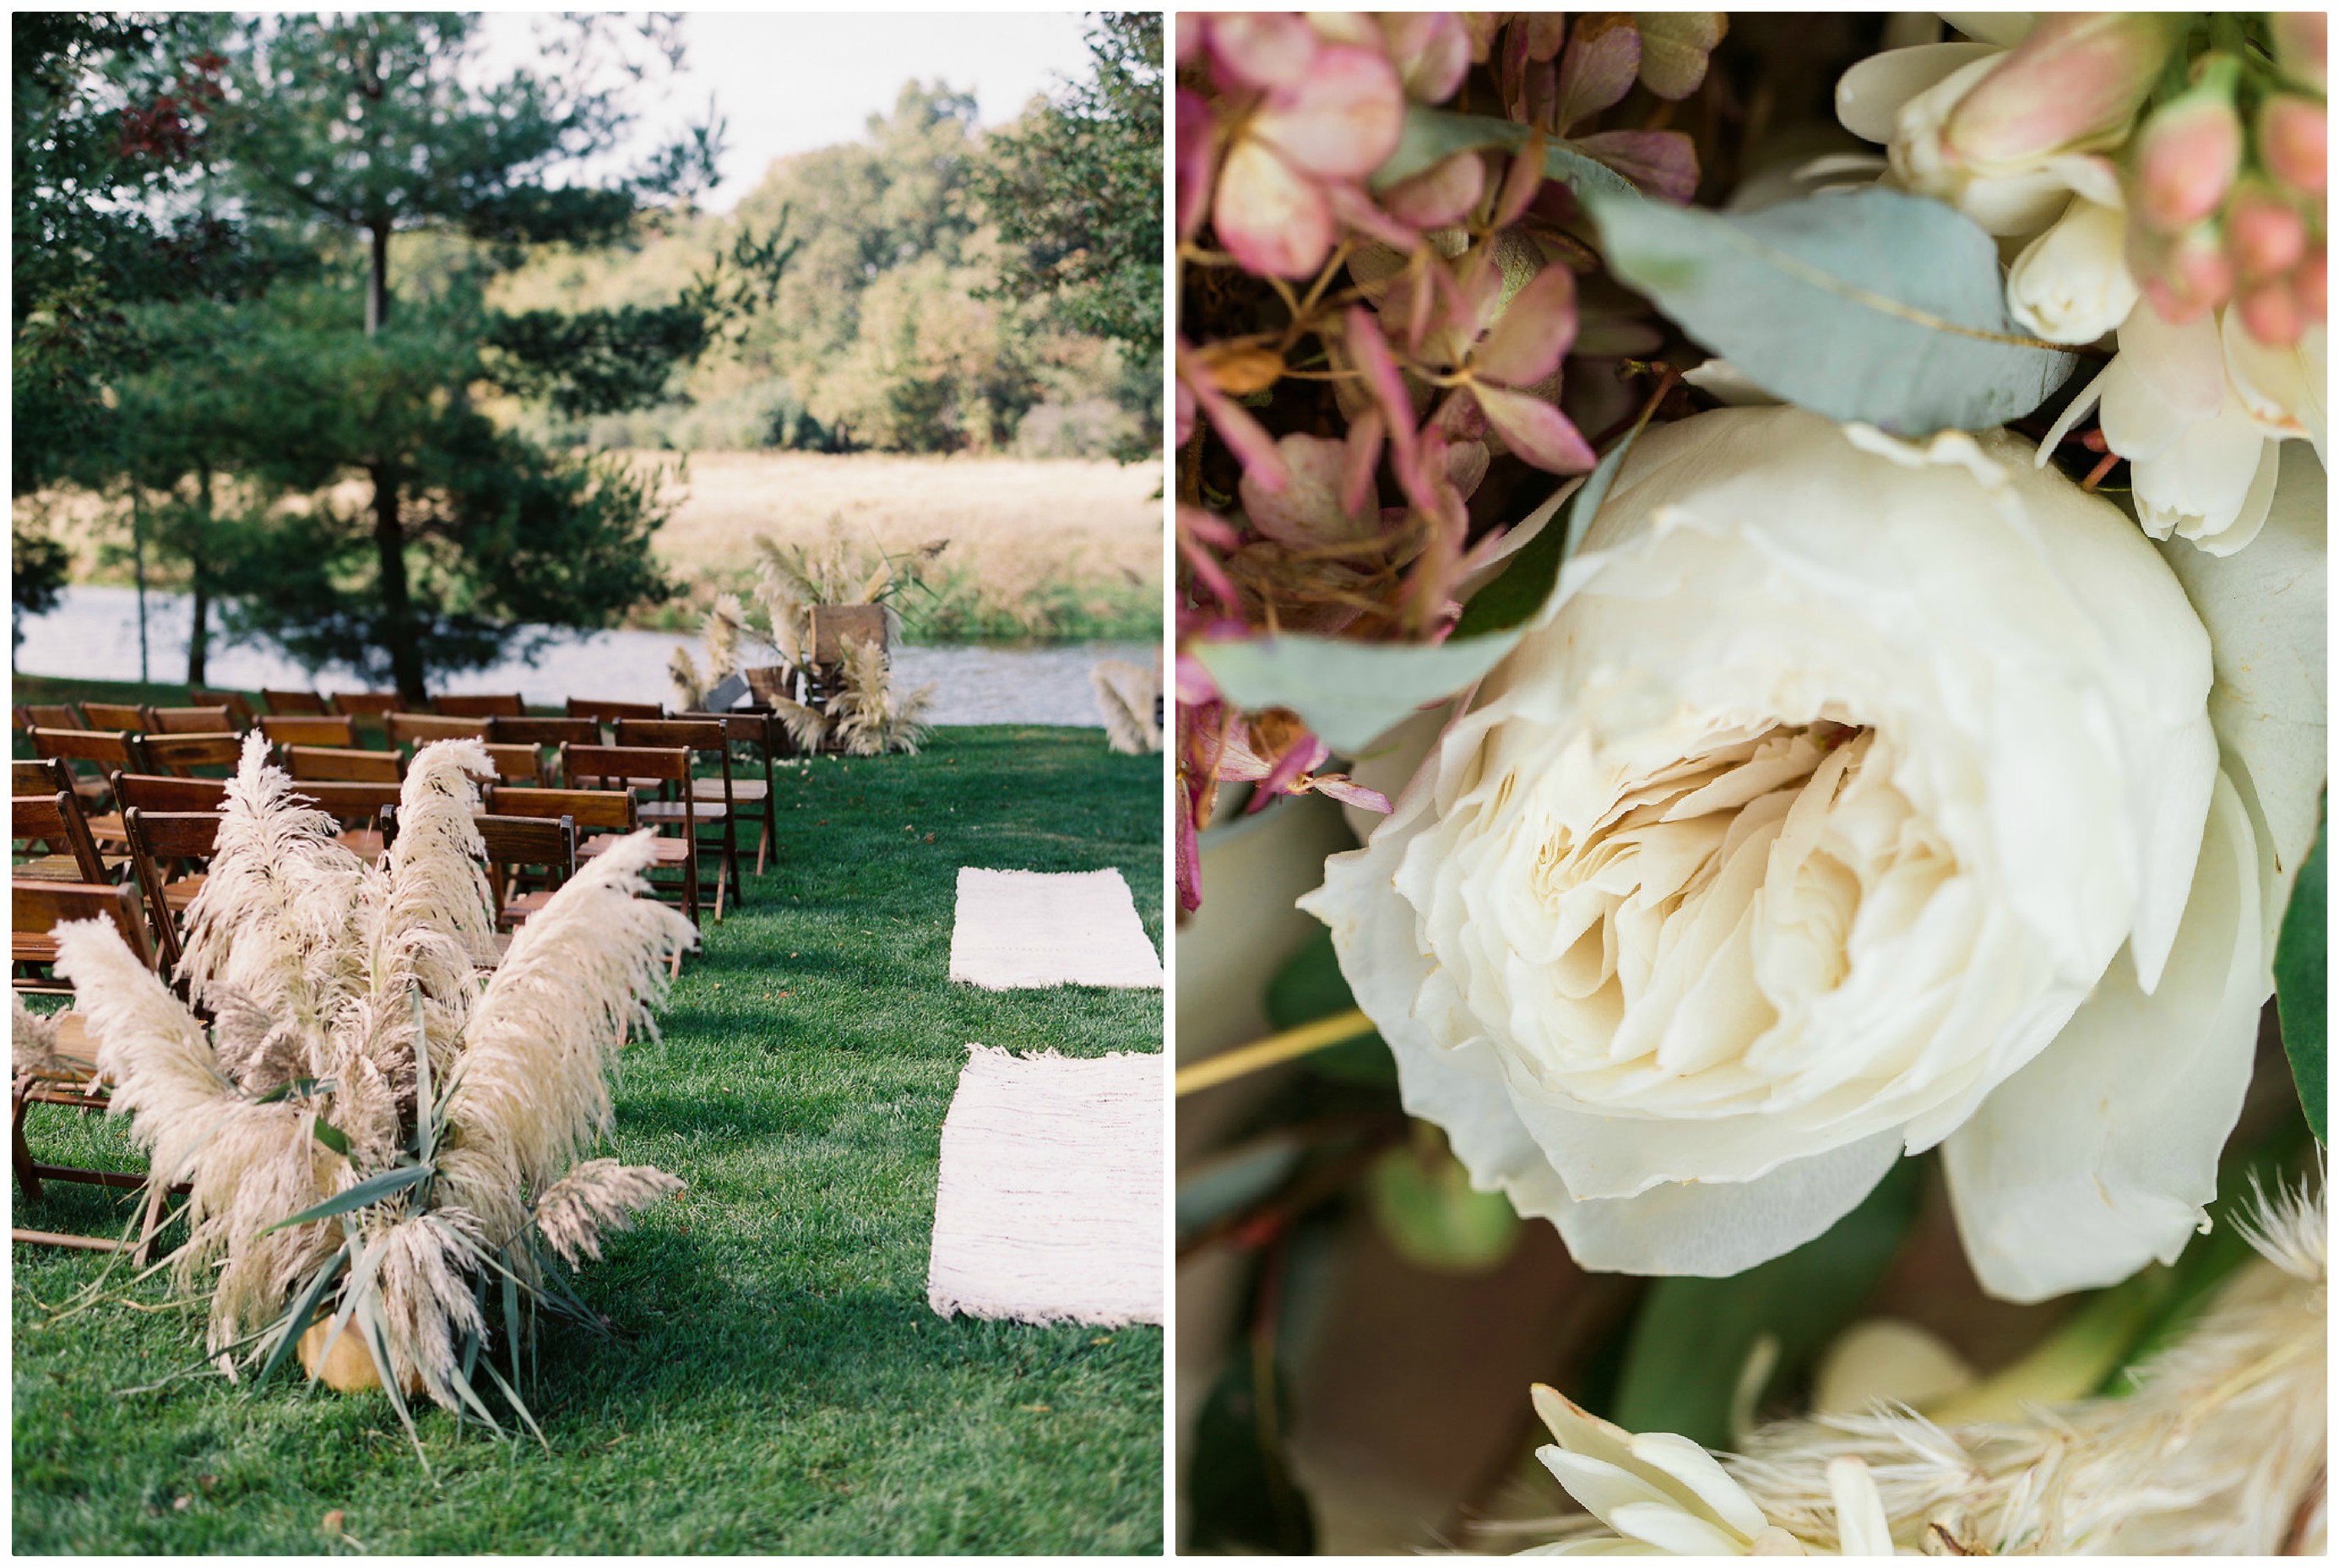 Rustic Wedding | The Day's Design | Ashely Slater Photography